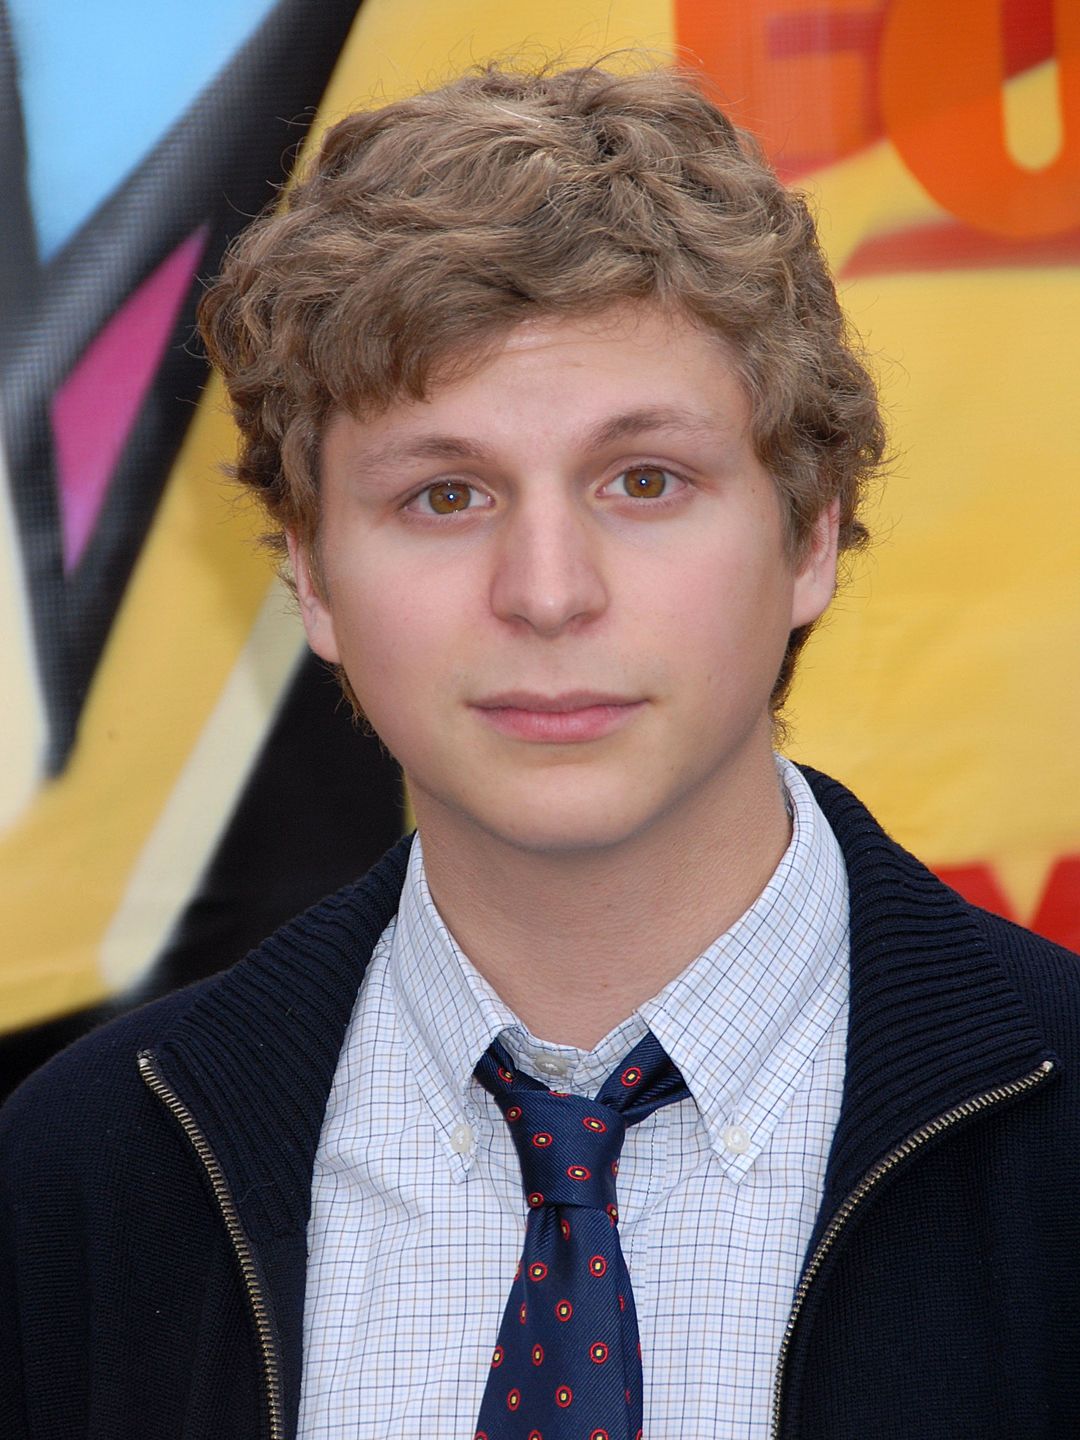 Michael Cera in his youth